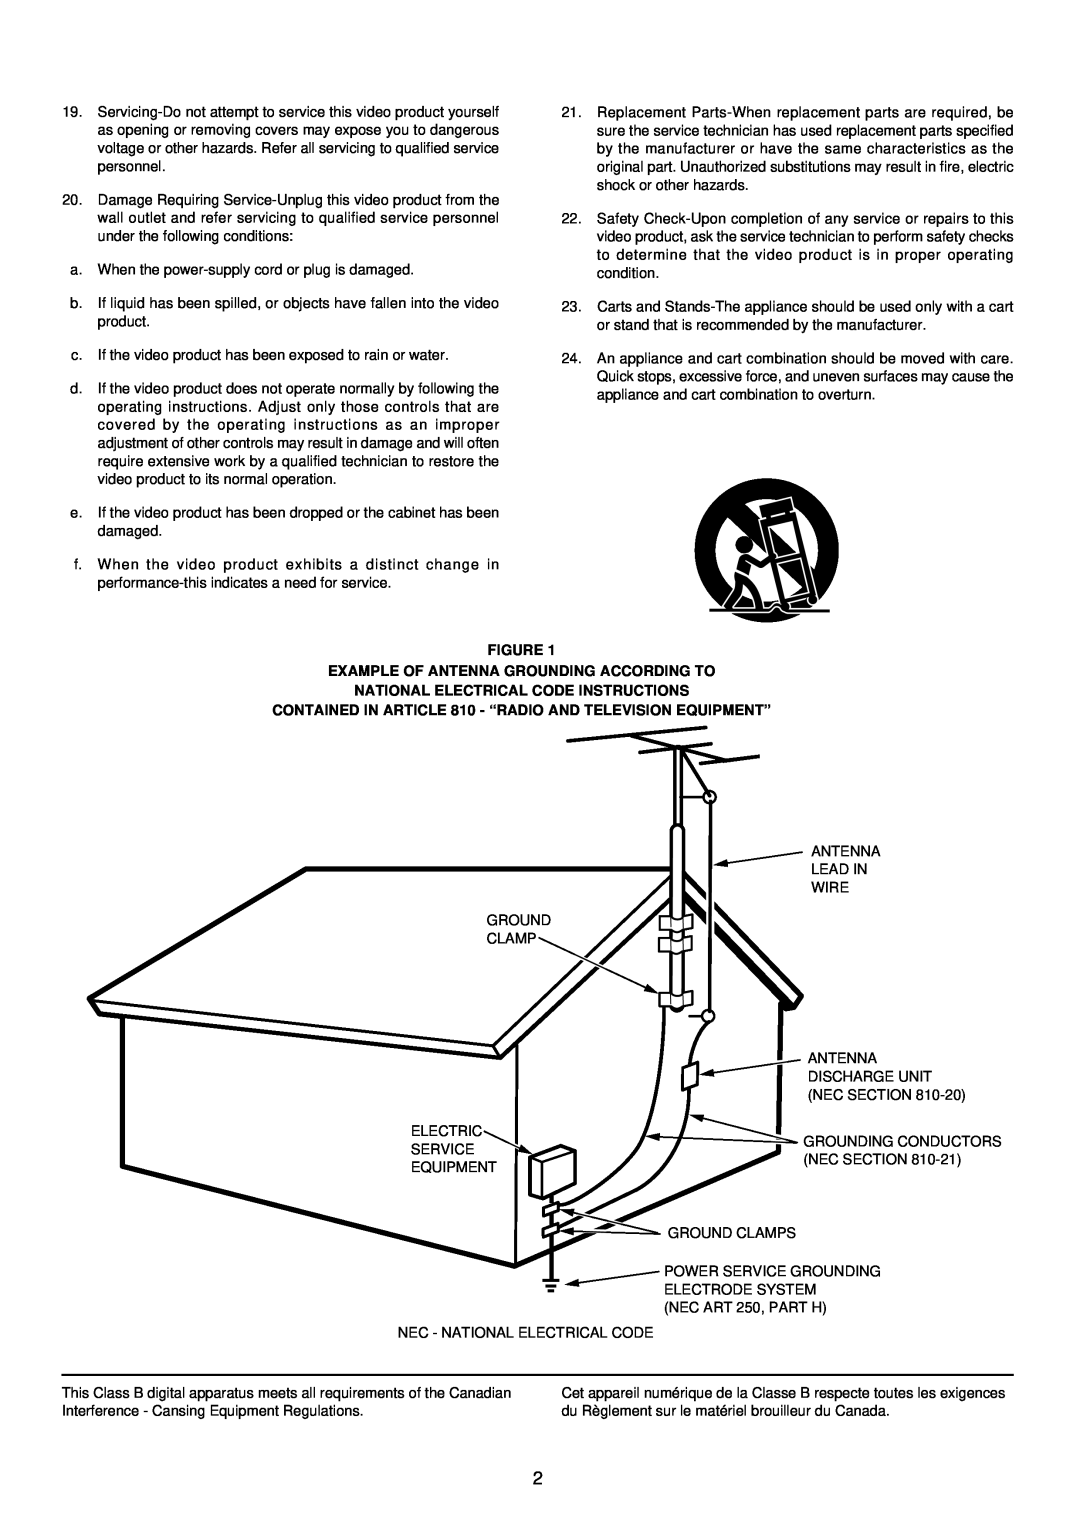 Marantz SR-14EX manual Figure Example Of Antenna Grounding According To, National Electrical Code Instructions 